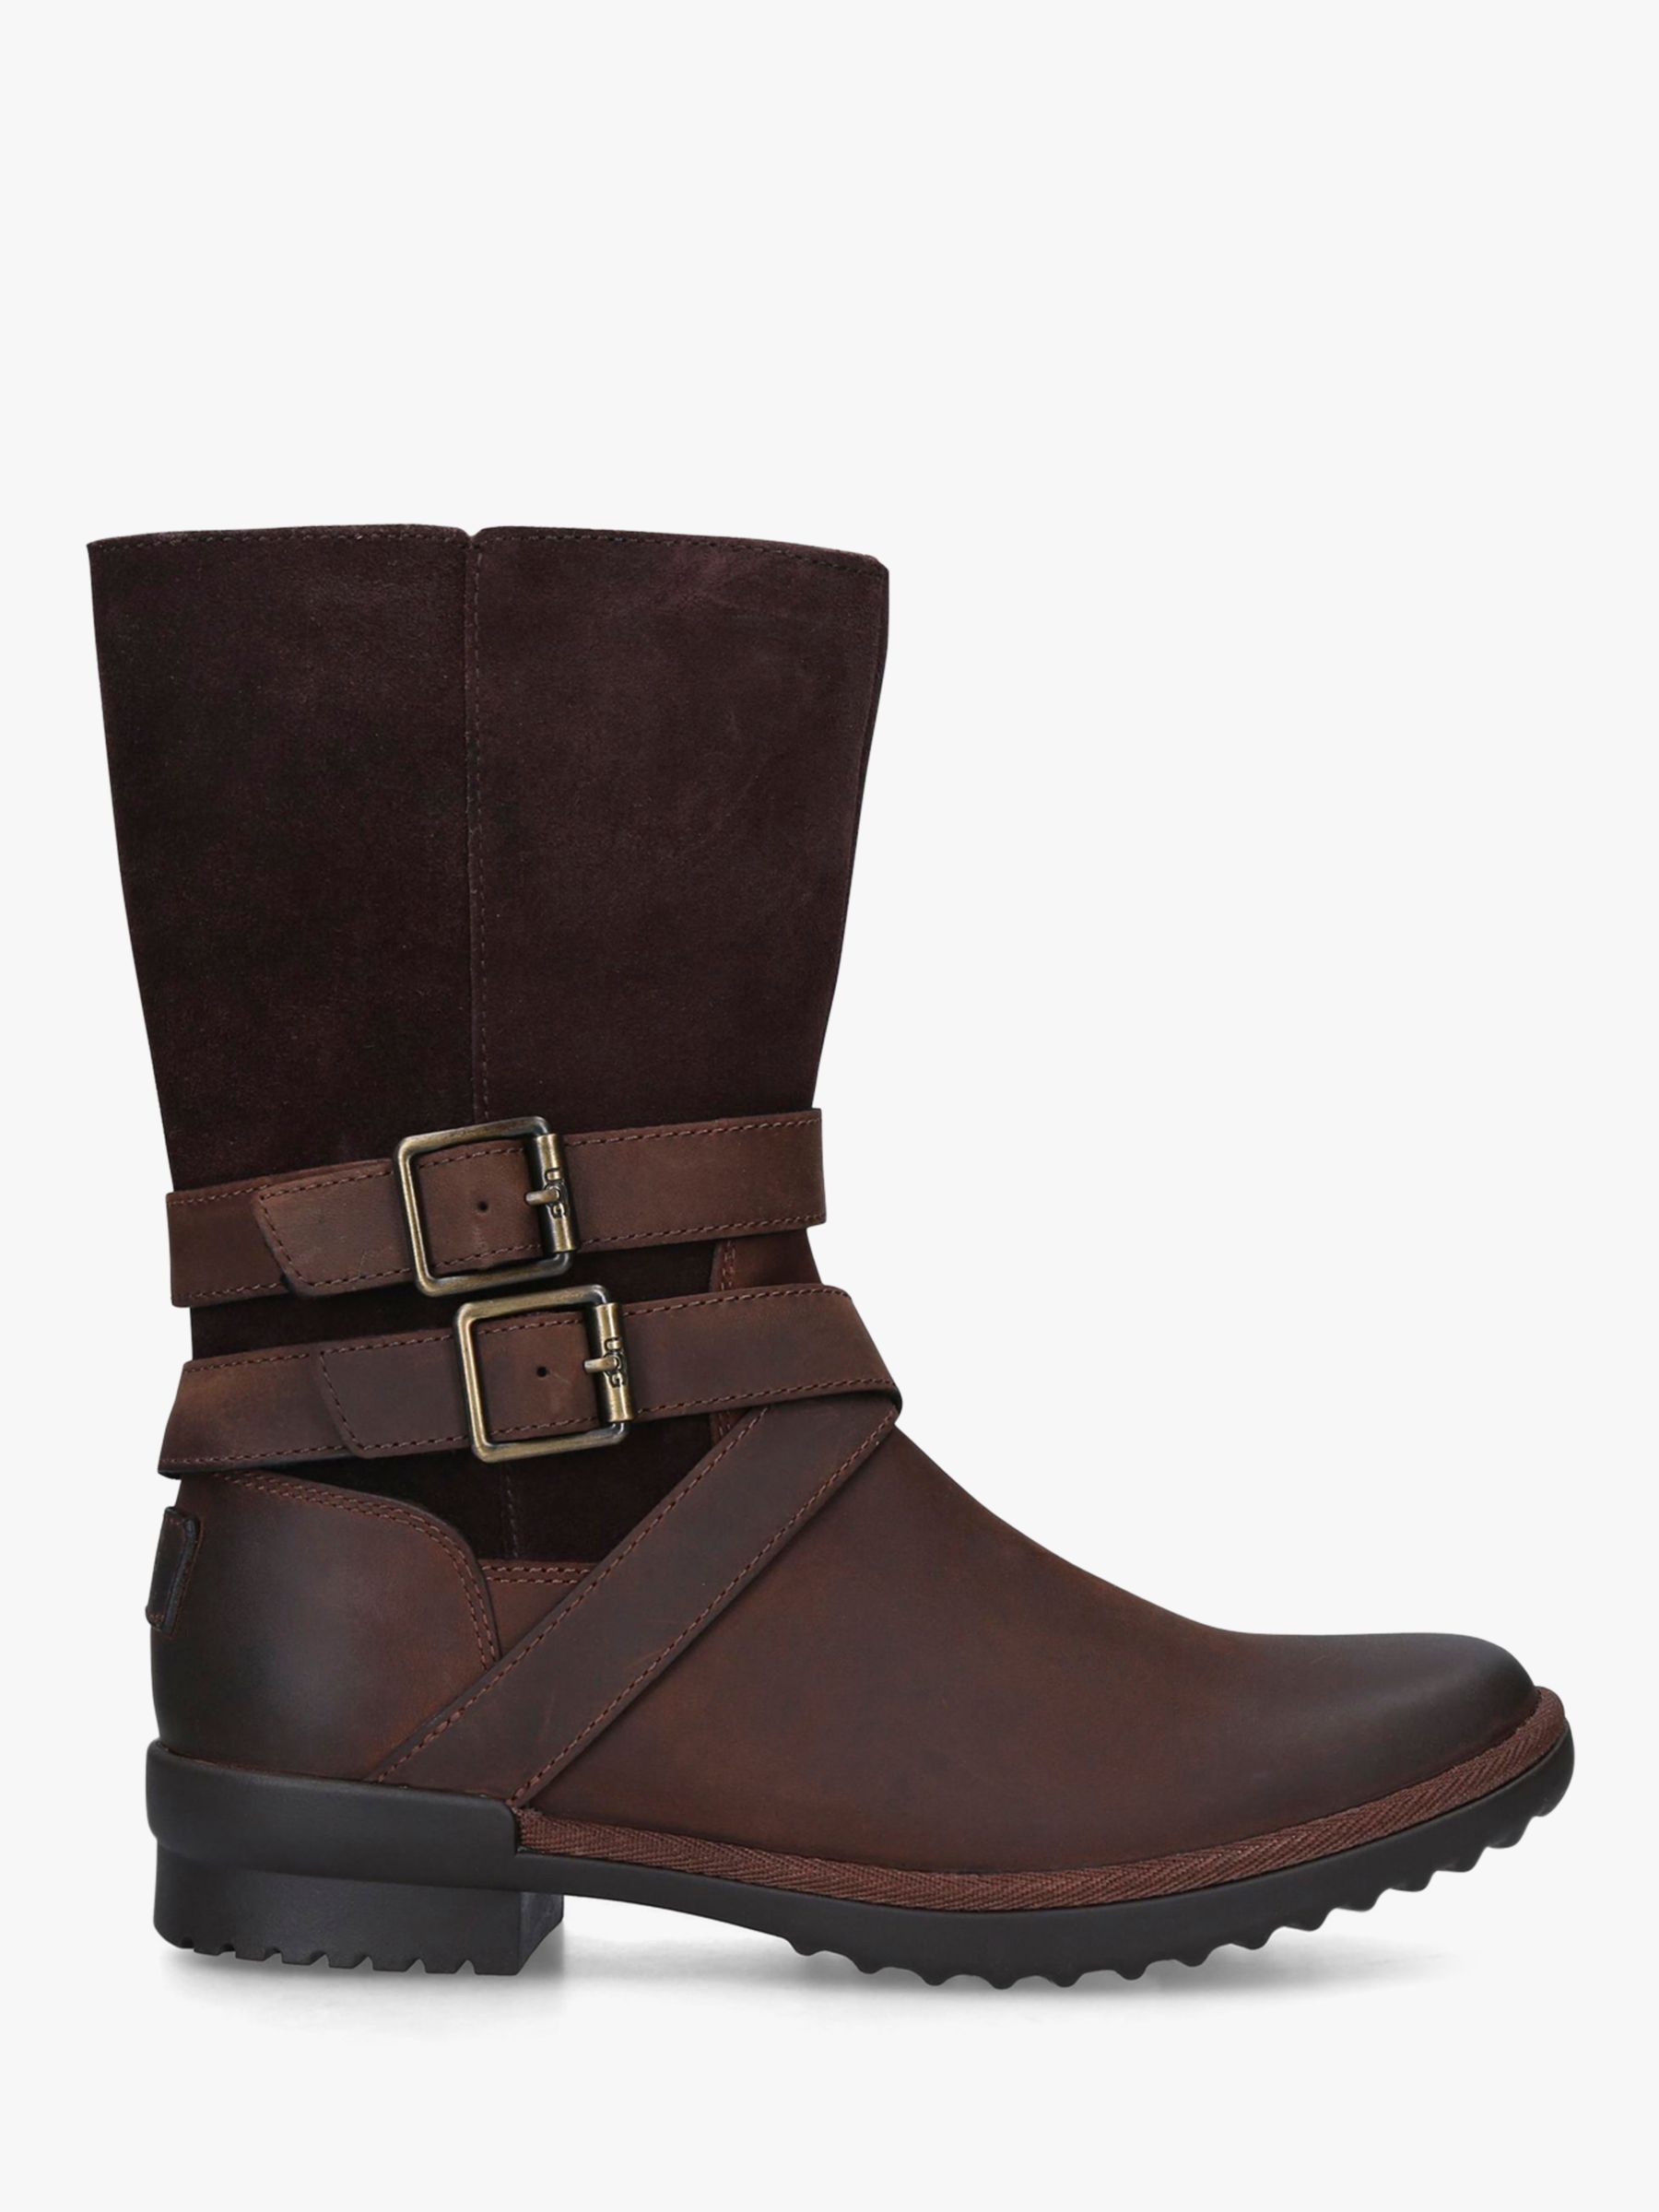 UGG Lorna Buckle Suede Ankle Boots, Brown at John Lewis & Partners